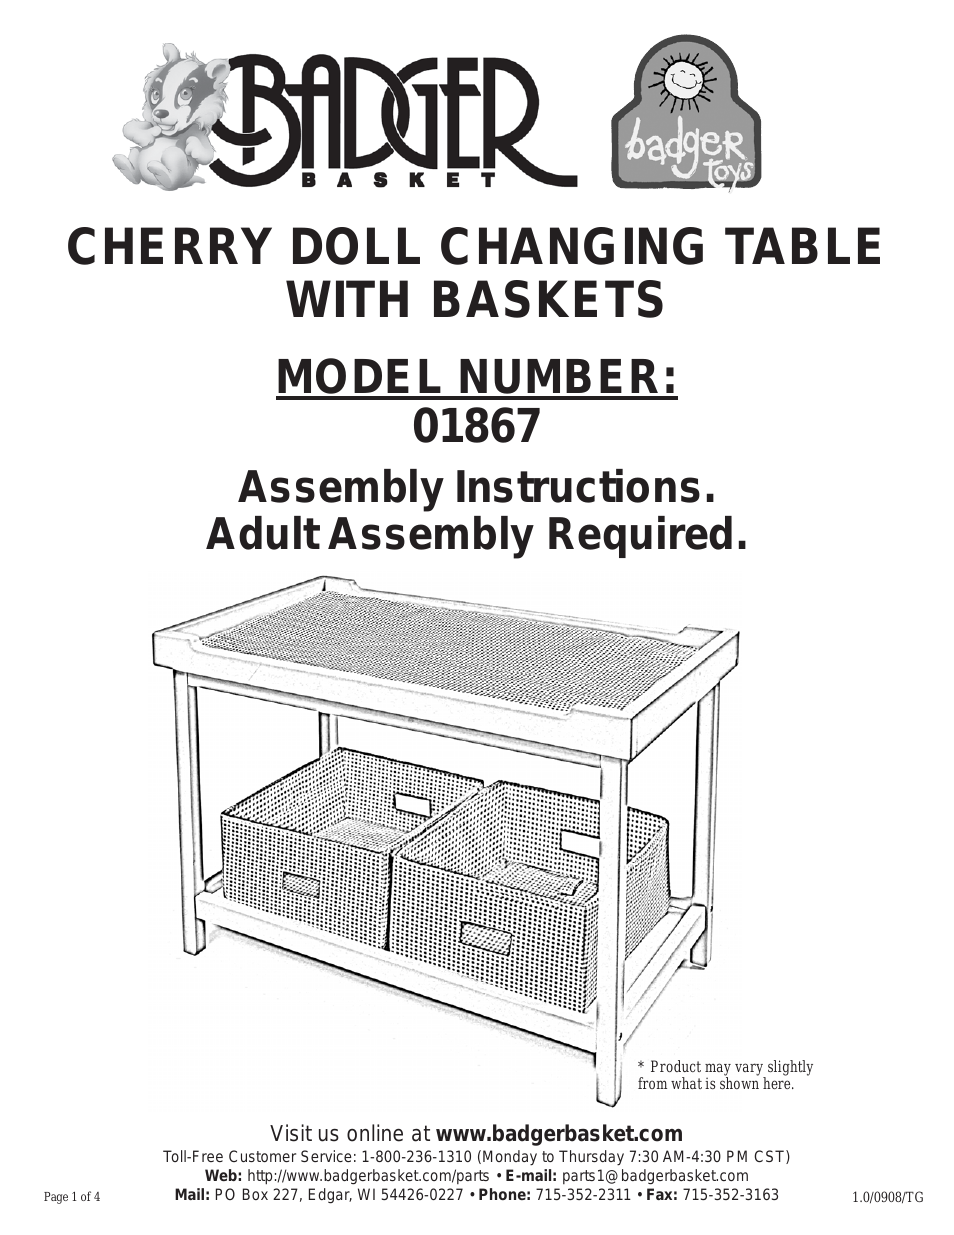 Cherry Doll Changing Table 01867